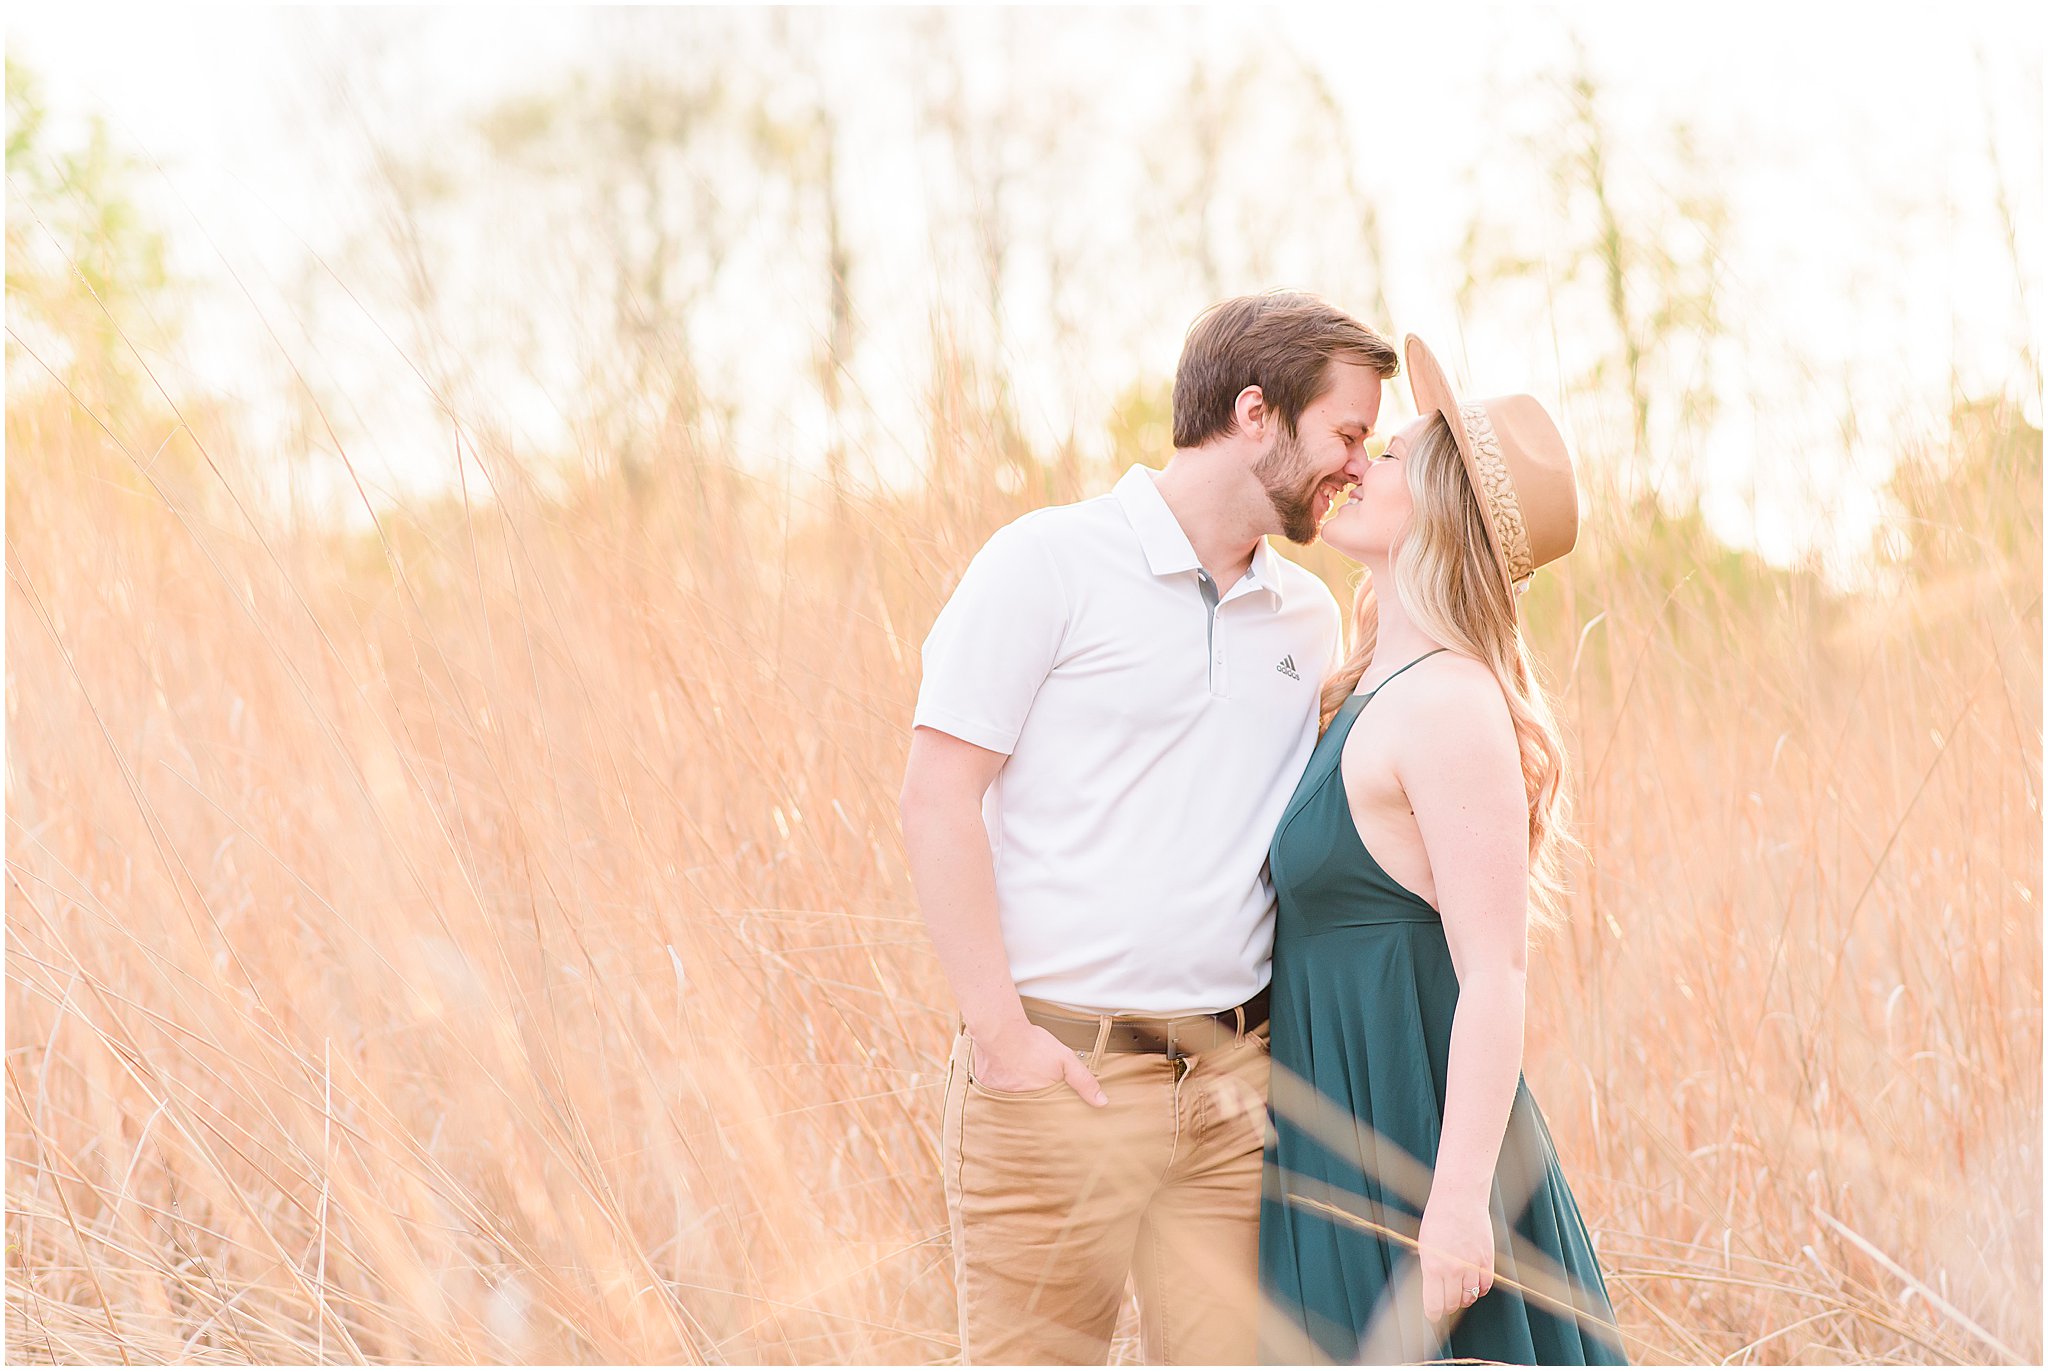 Couple kissing in sun-drenched field during Eagle Creek Park Engagement Session